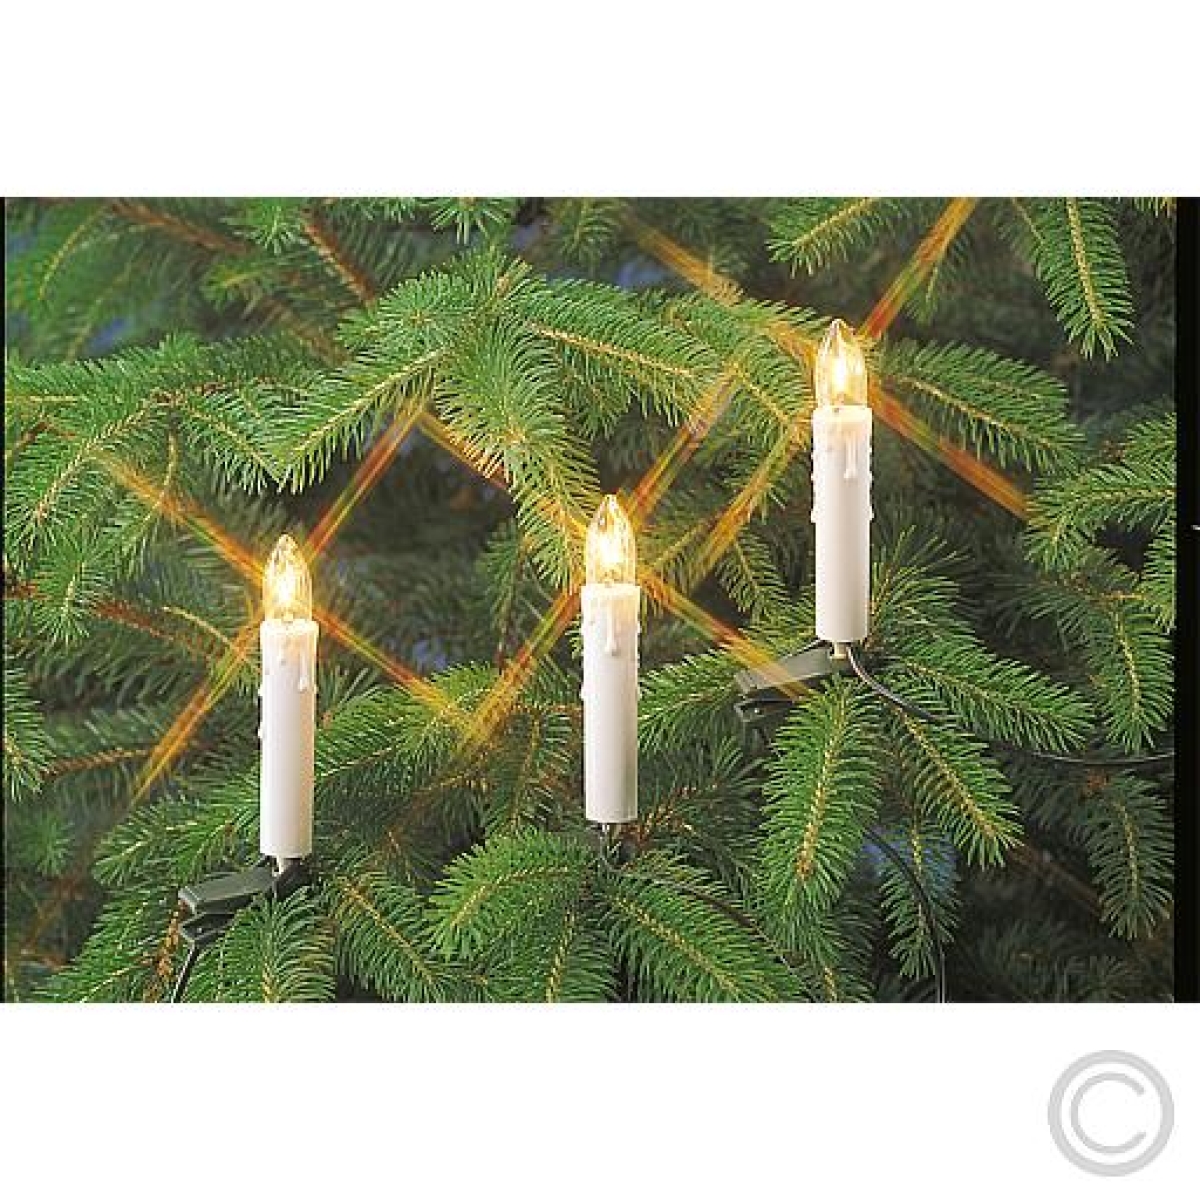 EGBInner chain with 16 LED top candles, illuminated length 6m total length 7.5m 16V/0.1W warm whiteArticle-No: 865405